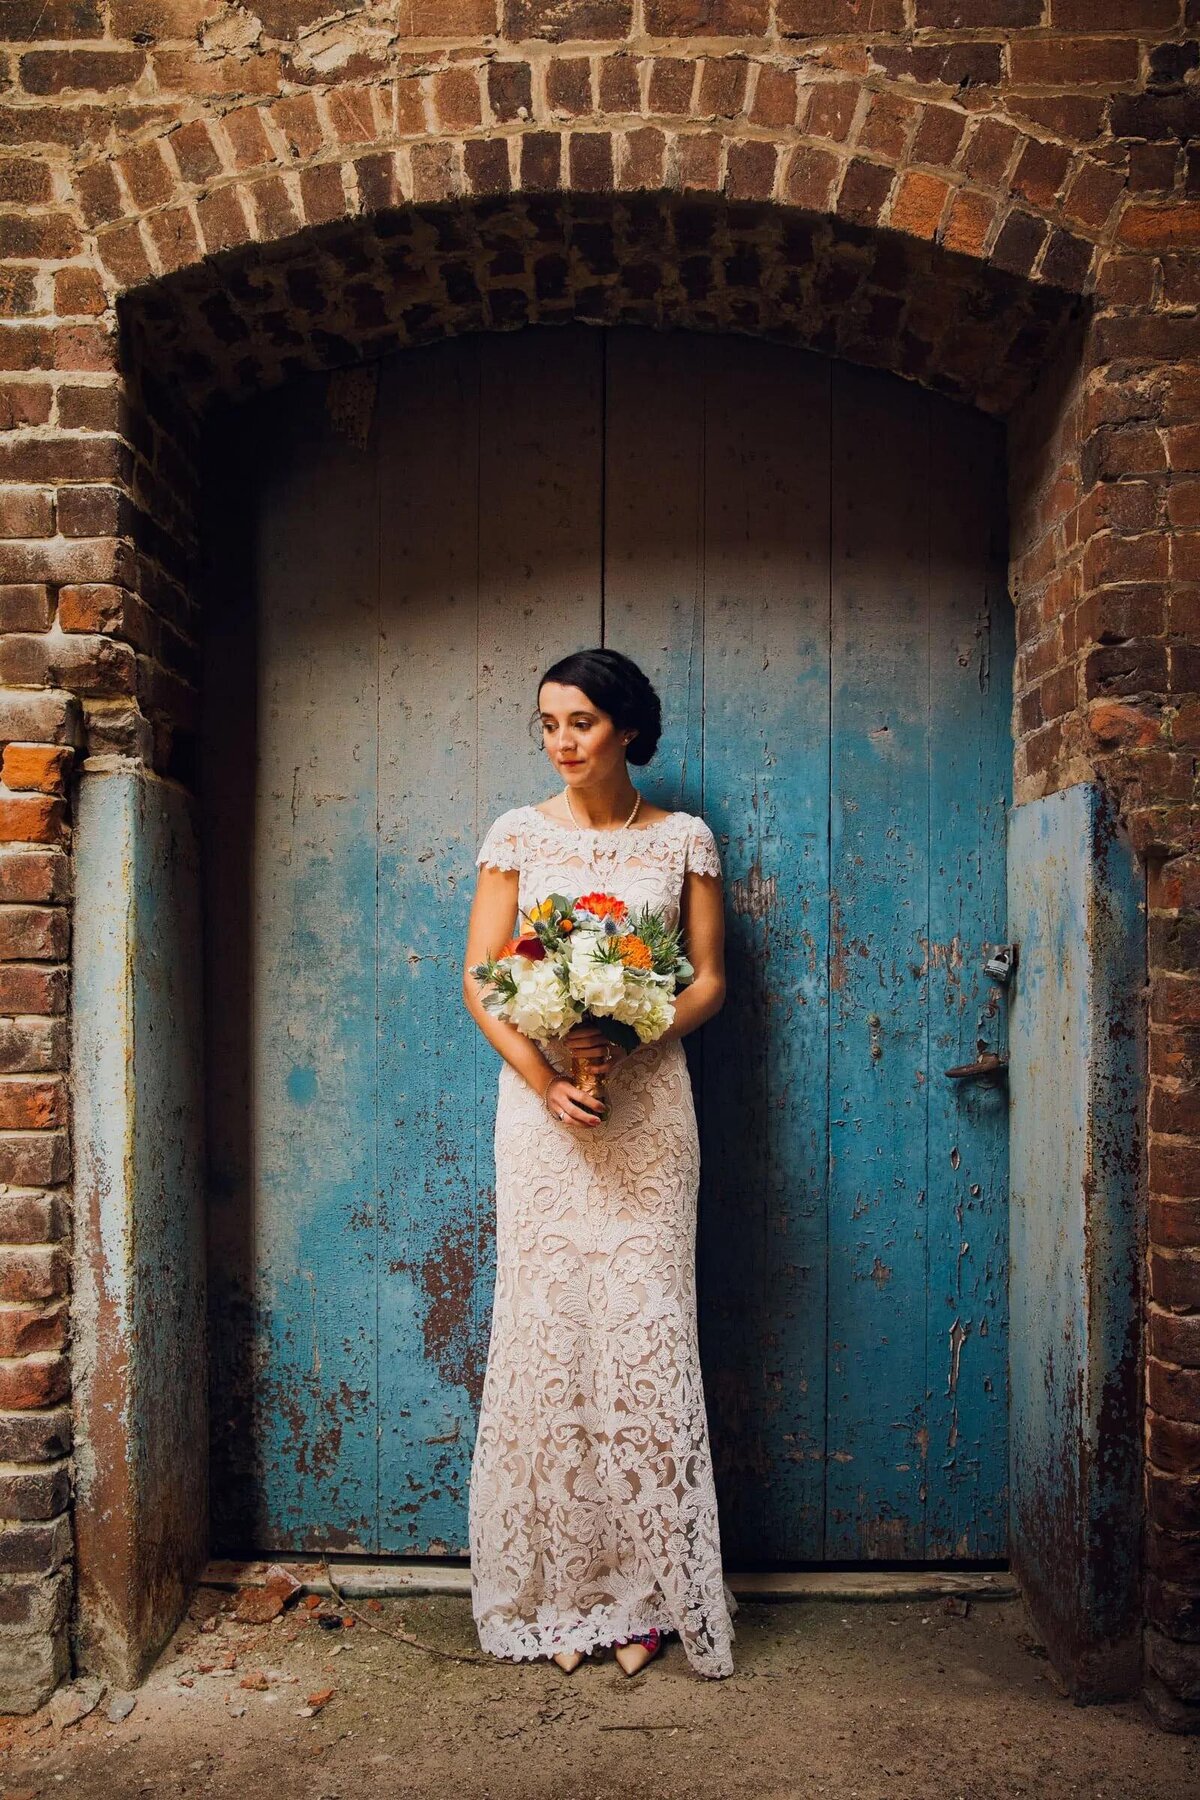 A bride stands serenely against a textured blue door, her lace gown and bouquet in contrast with the rustic backdrop.